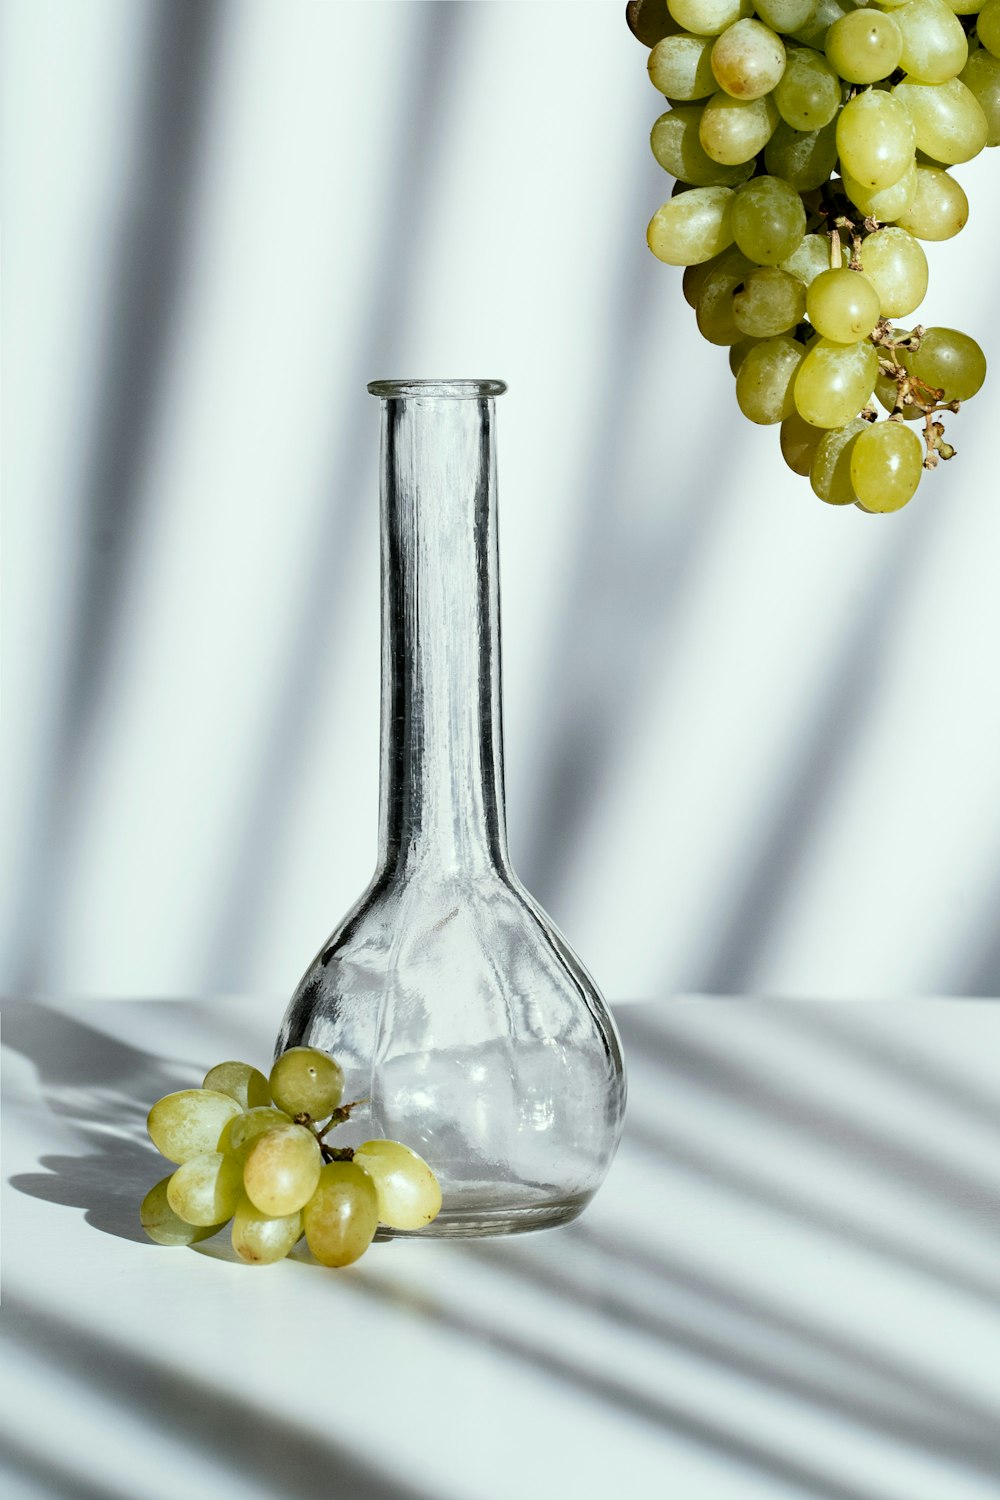 a glass vase with some grapes in it